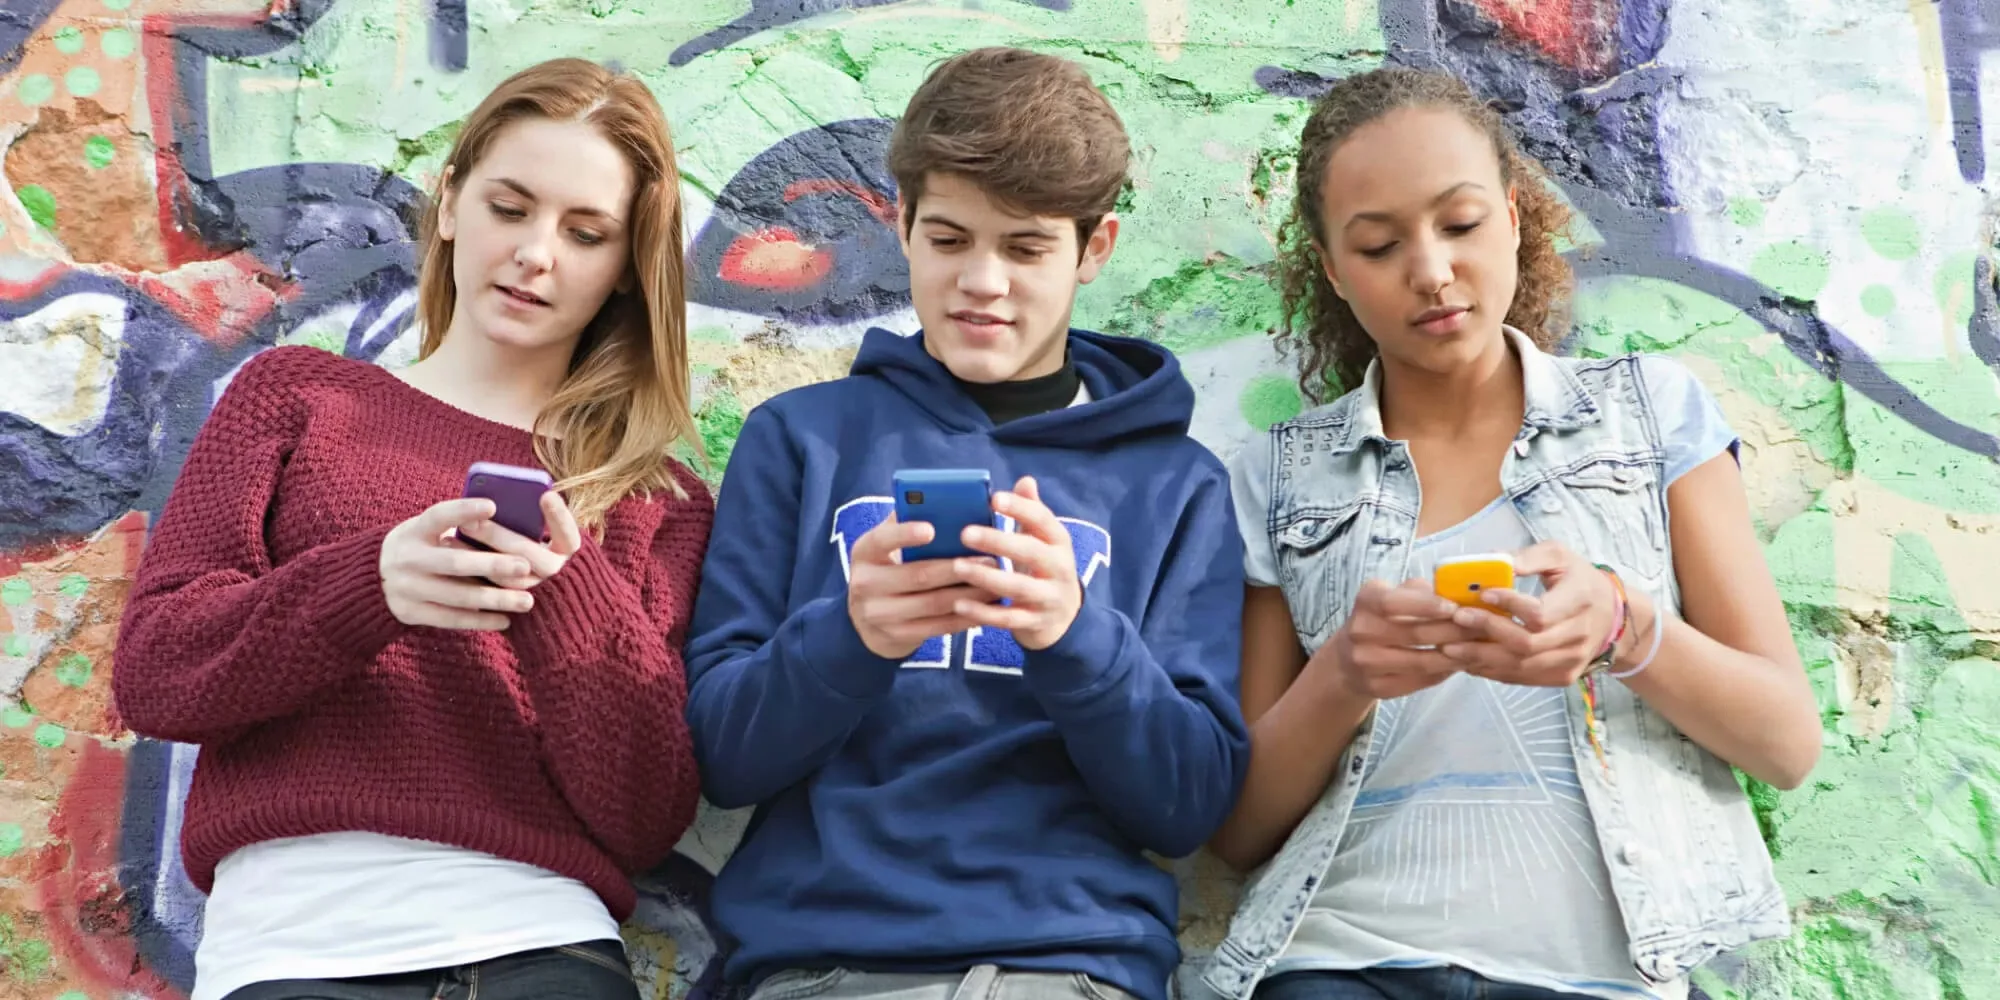 Meta goes the extra mile for teen protection, adds new tool